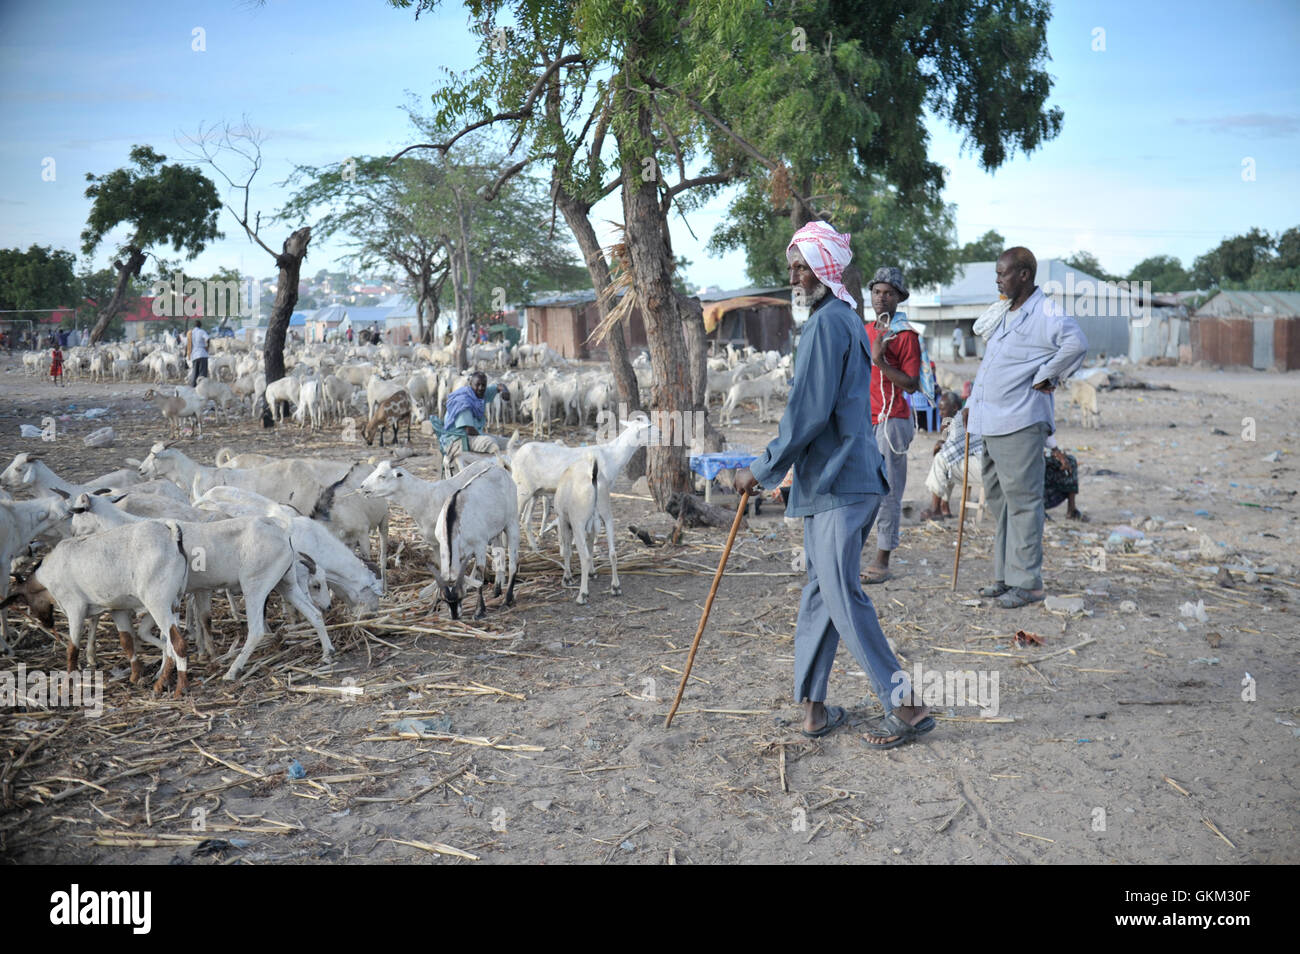 A Somali man stands watch over a herd of goats at Bakara Animal Market in Mogadishu, Somalia, on April 13. Once notorious for being both the site of Black Hawk Down, in which 18 American soldiers were killed in 1993, and later as an al-Shabaab stronghold, Bakara market is now slowly losing its past notoriety and becoming better known for its thriving economy. In the district's animal market, thousands of goats are now brought each morning, where they are sold on to later be slaughtered for their meat. AU UN IST PHOTO / TOBIN JONES. Stock Photo